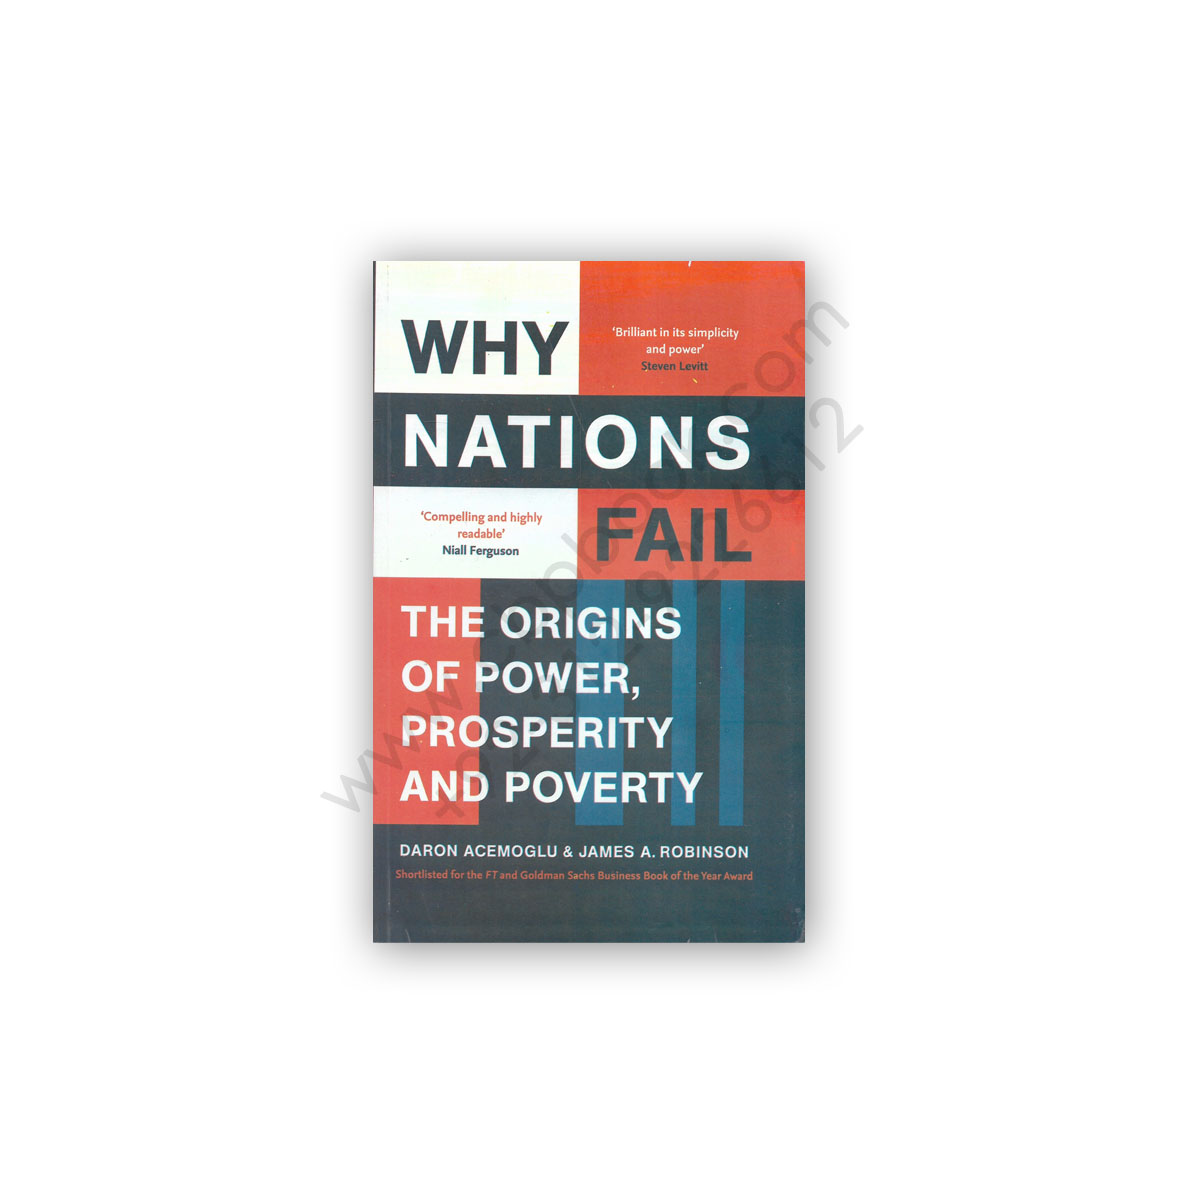 WHY NATIONS FAIL By DARON ACEMOGLU and JAMES A.ROBINSON – CBPBOOK